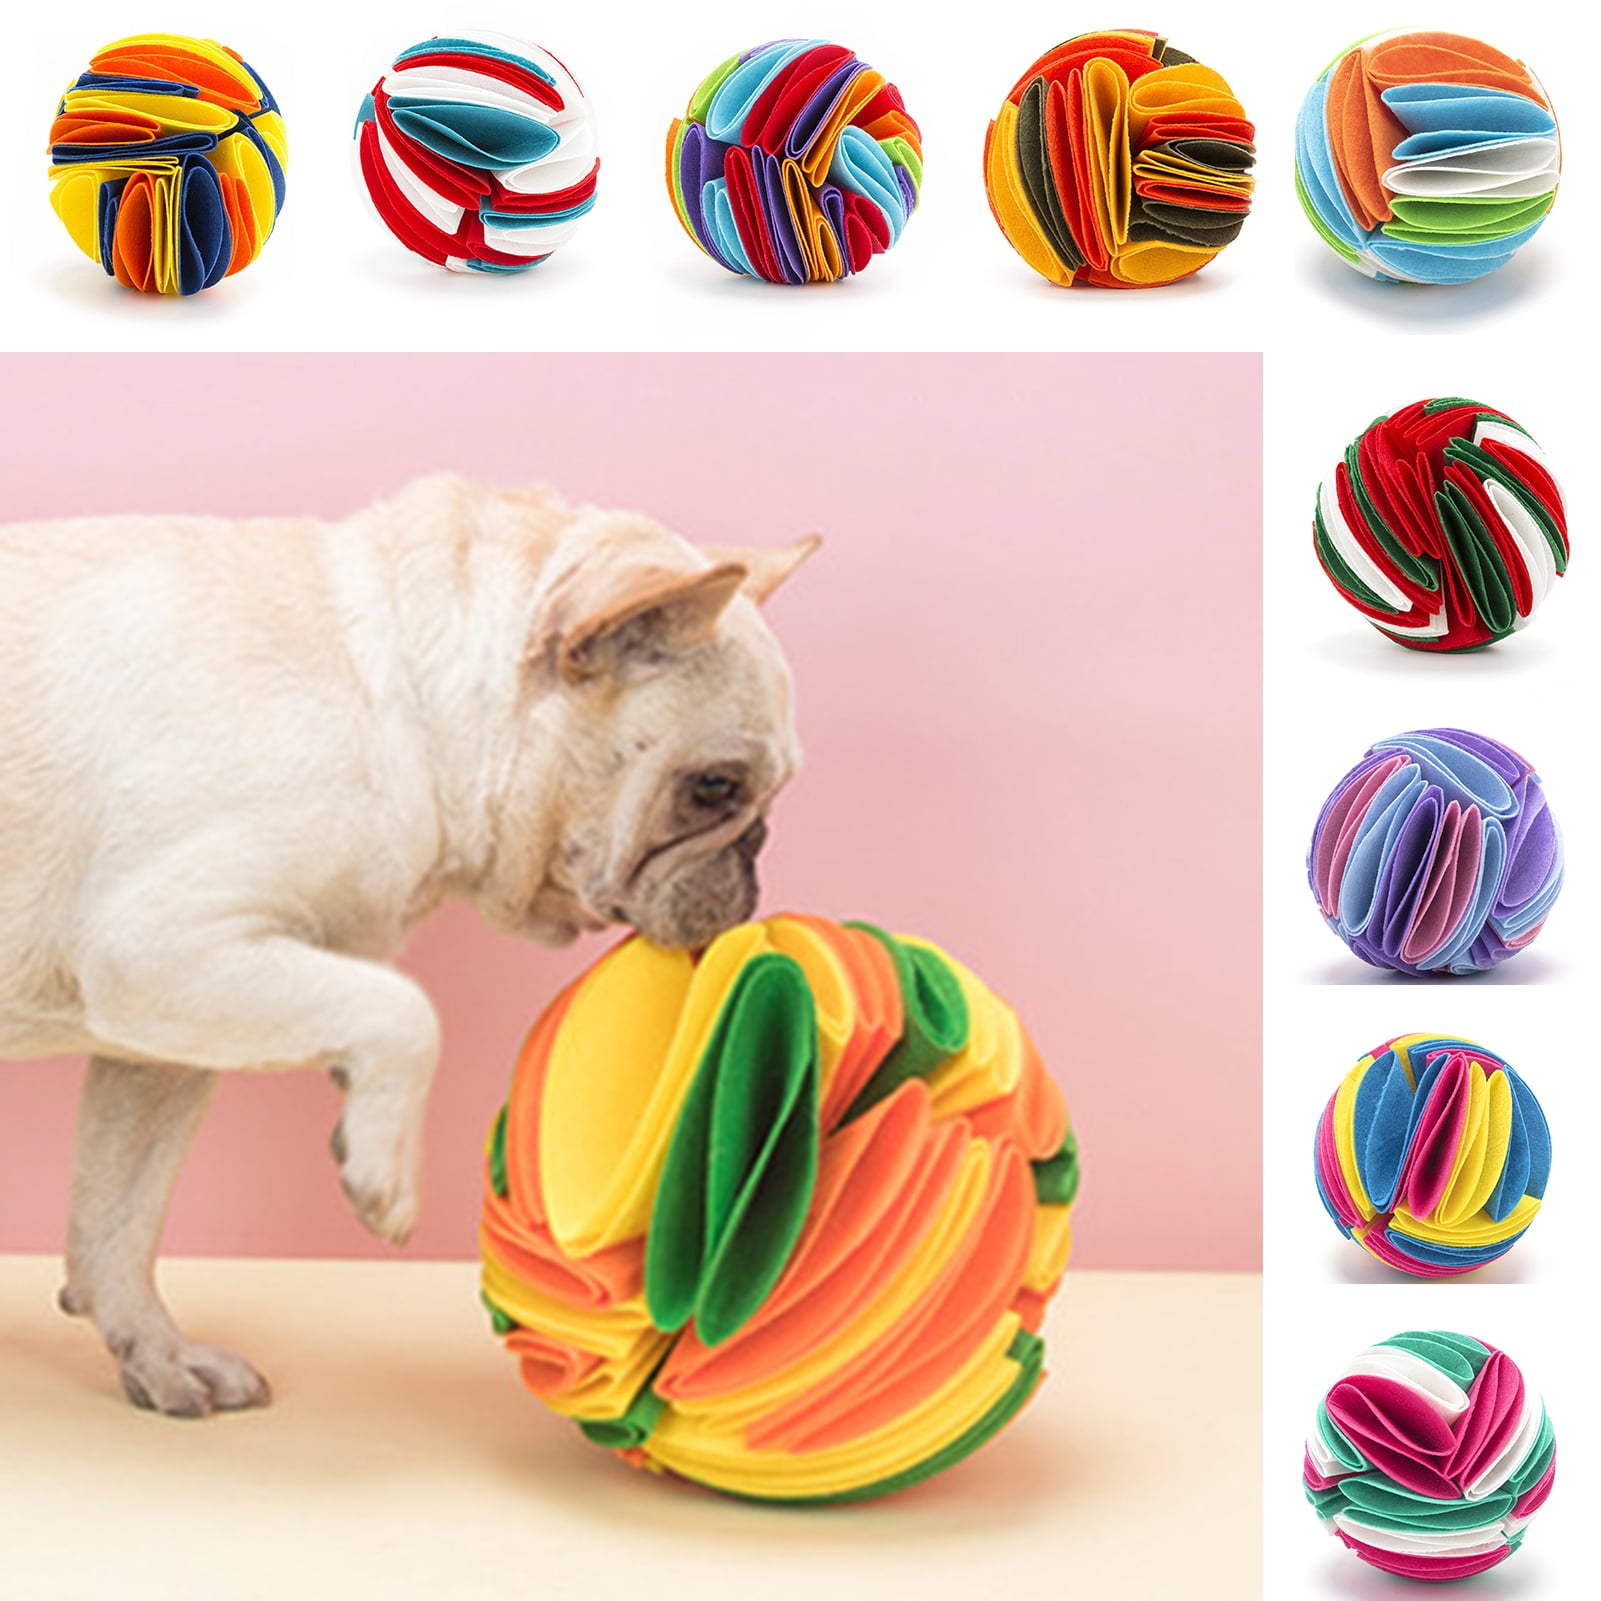 Ablechien Interactive Foraging Ball for Dogs - Snuffle Puzzle Toy  Encourages Natural Skills for Large, Medium and Small Dogs - Machine  Washable